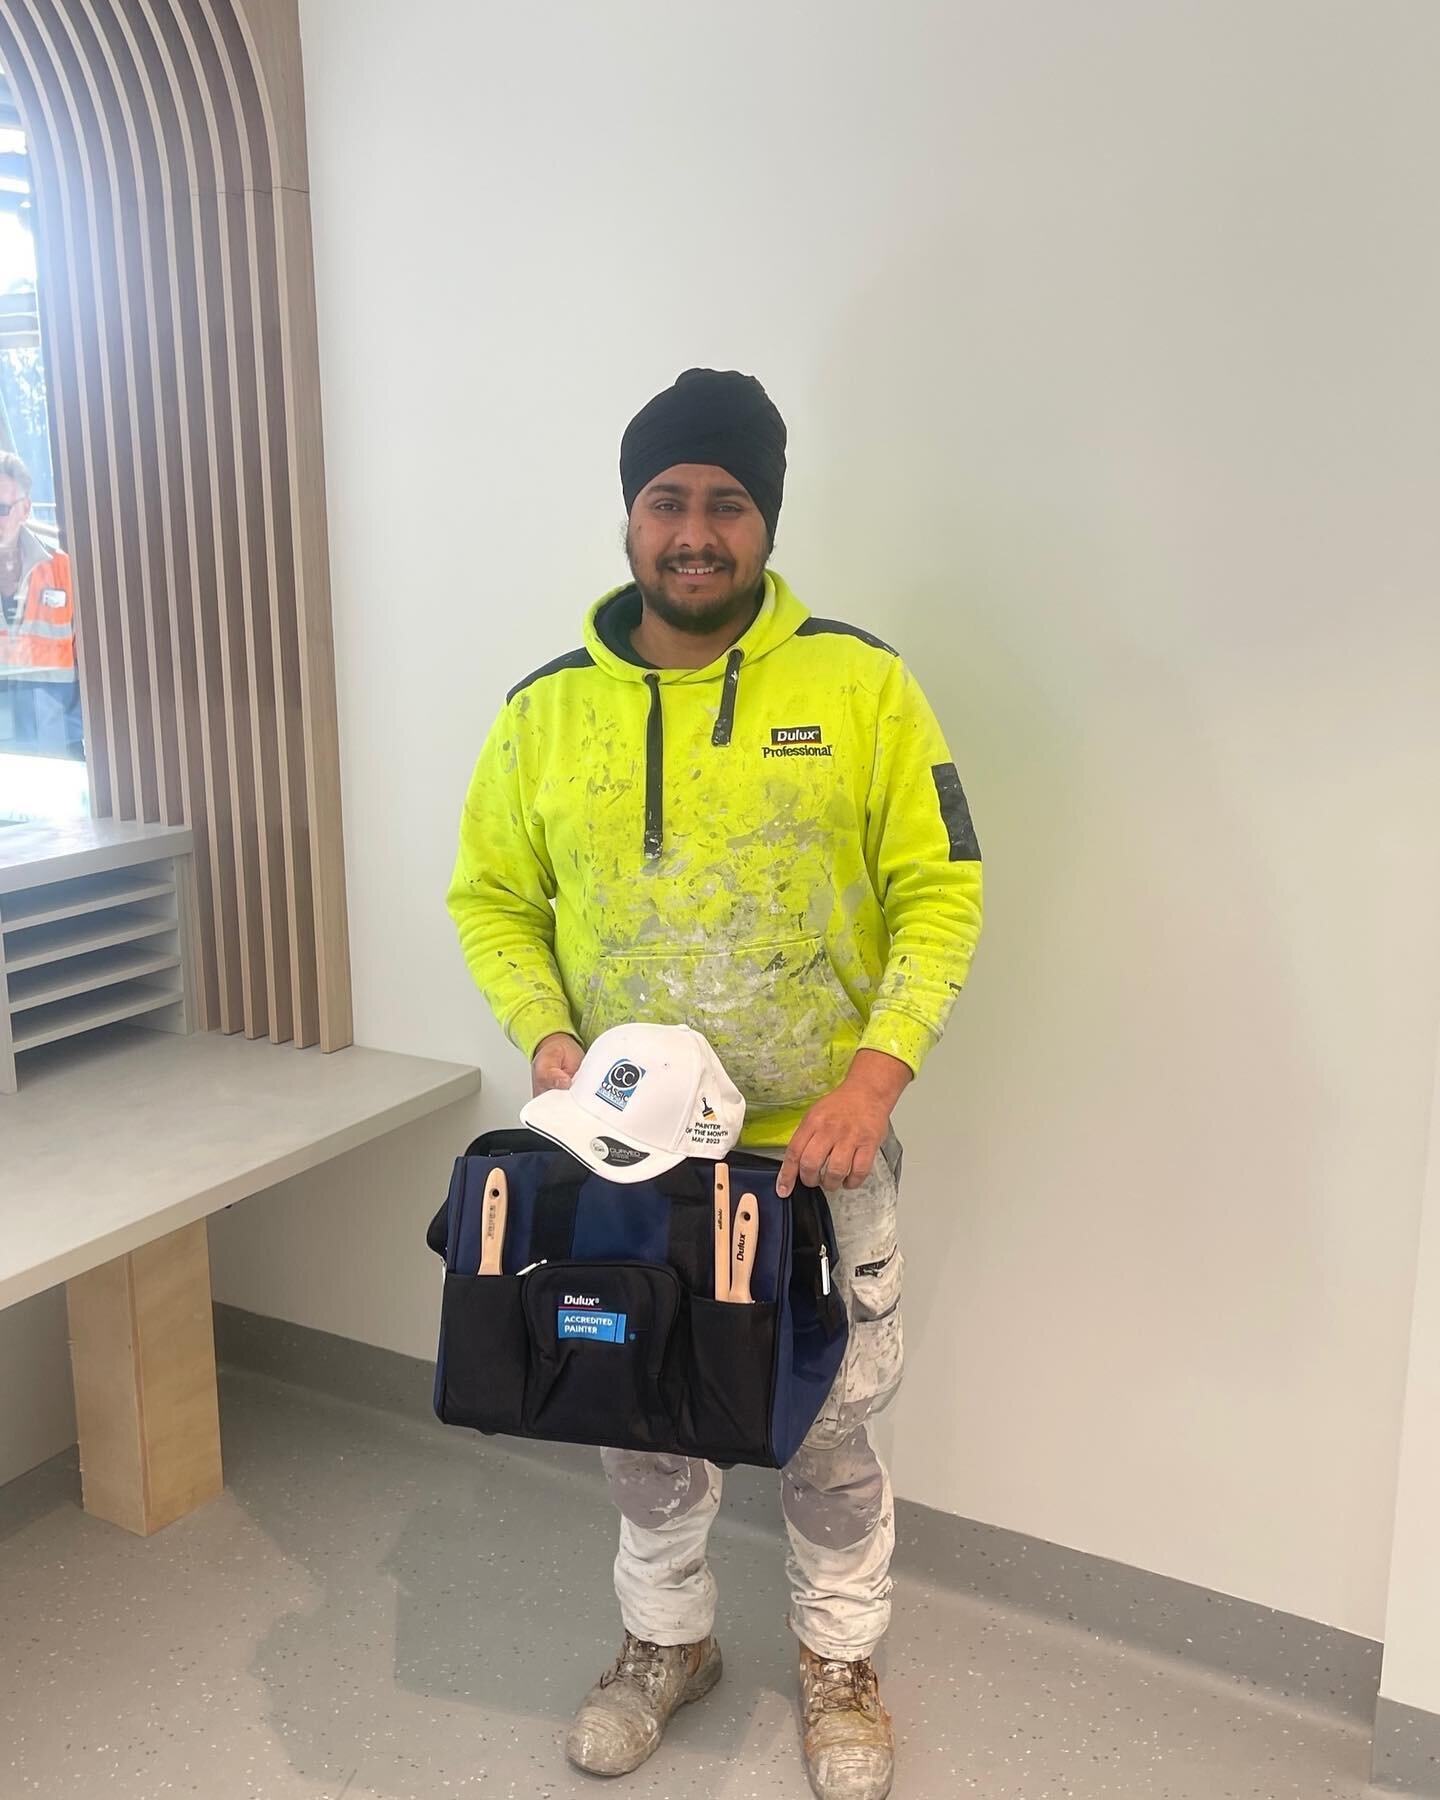 Congratulations Jodhbir on Painter of the Month! 🥳 Thank you for your contribution to #teamclassic 👏🏼👏🏼👏🏼